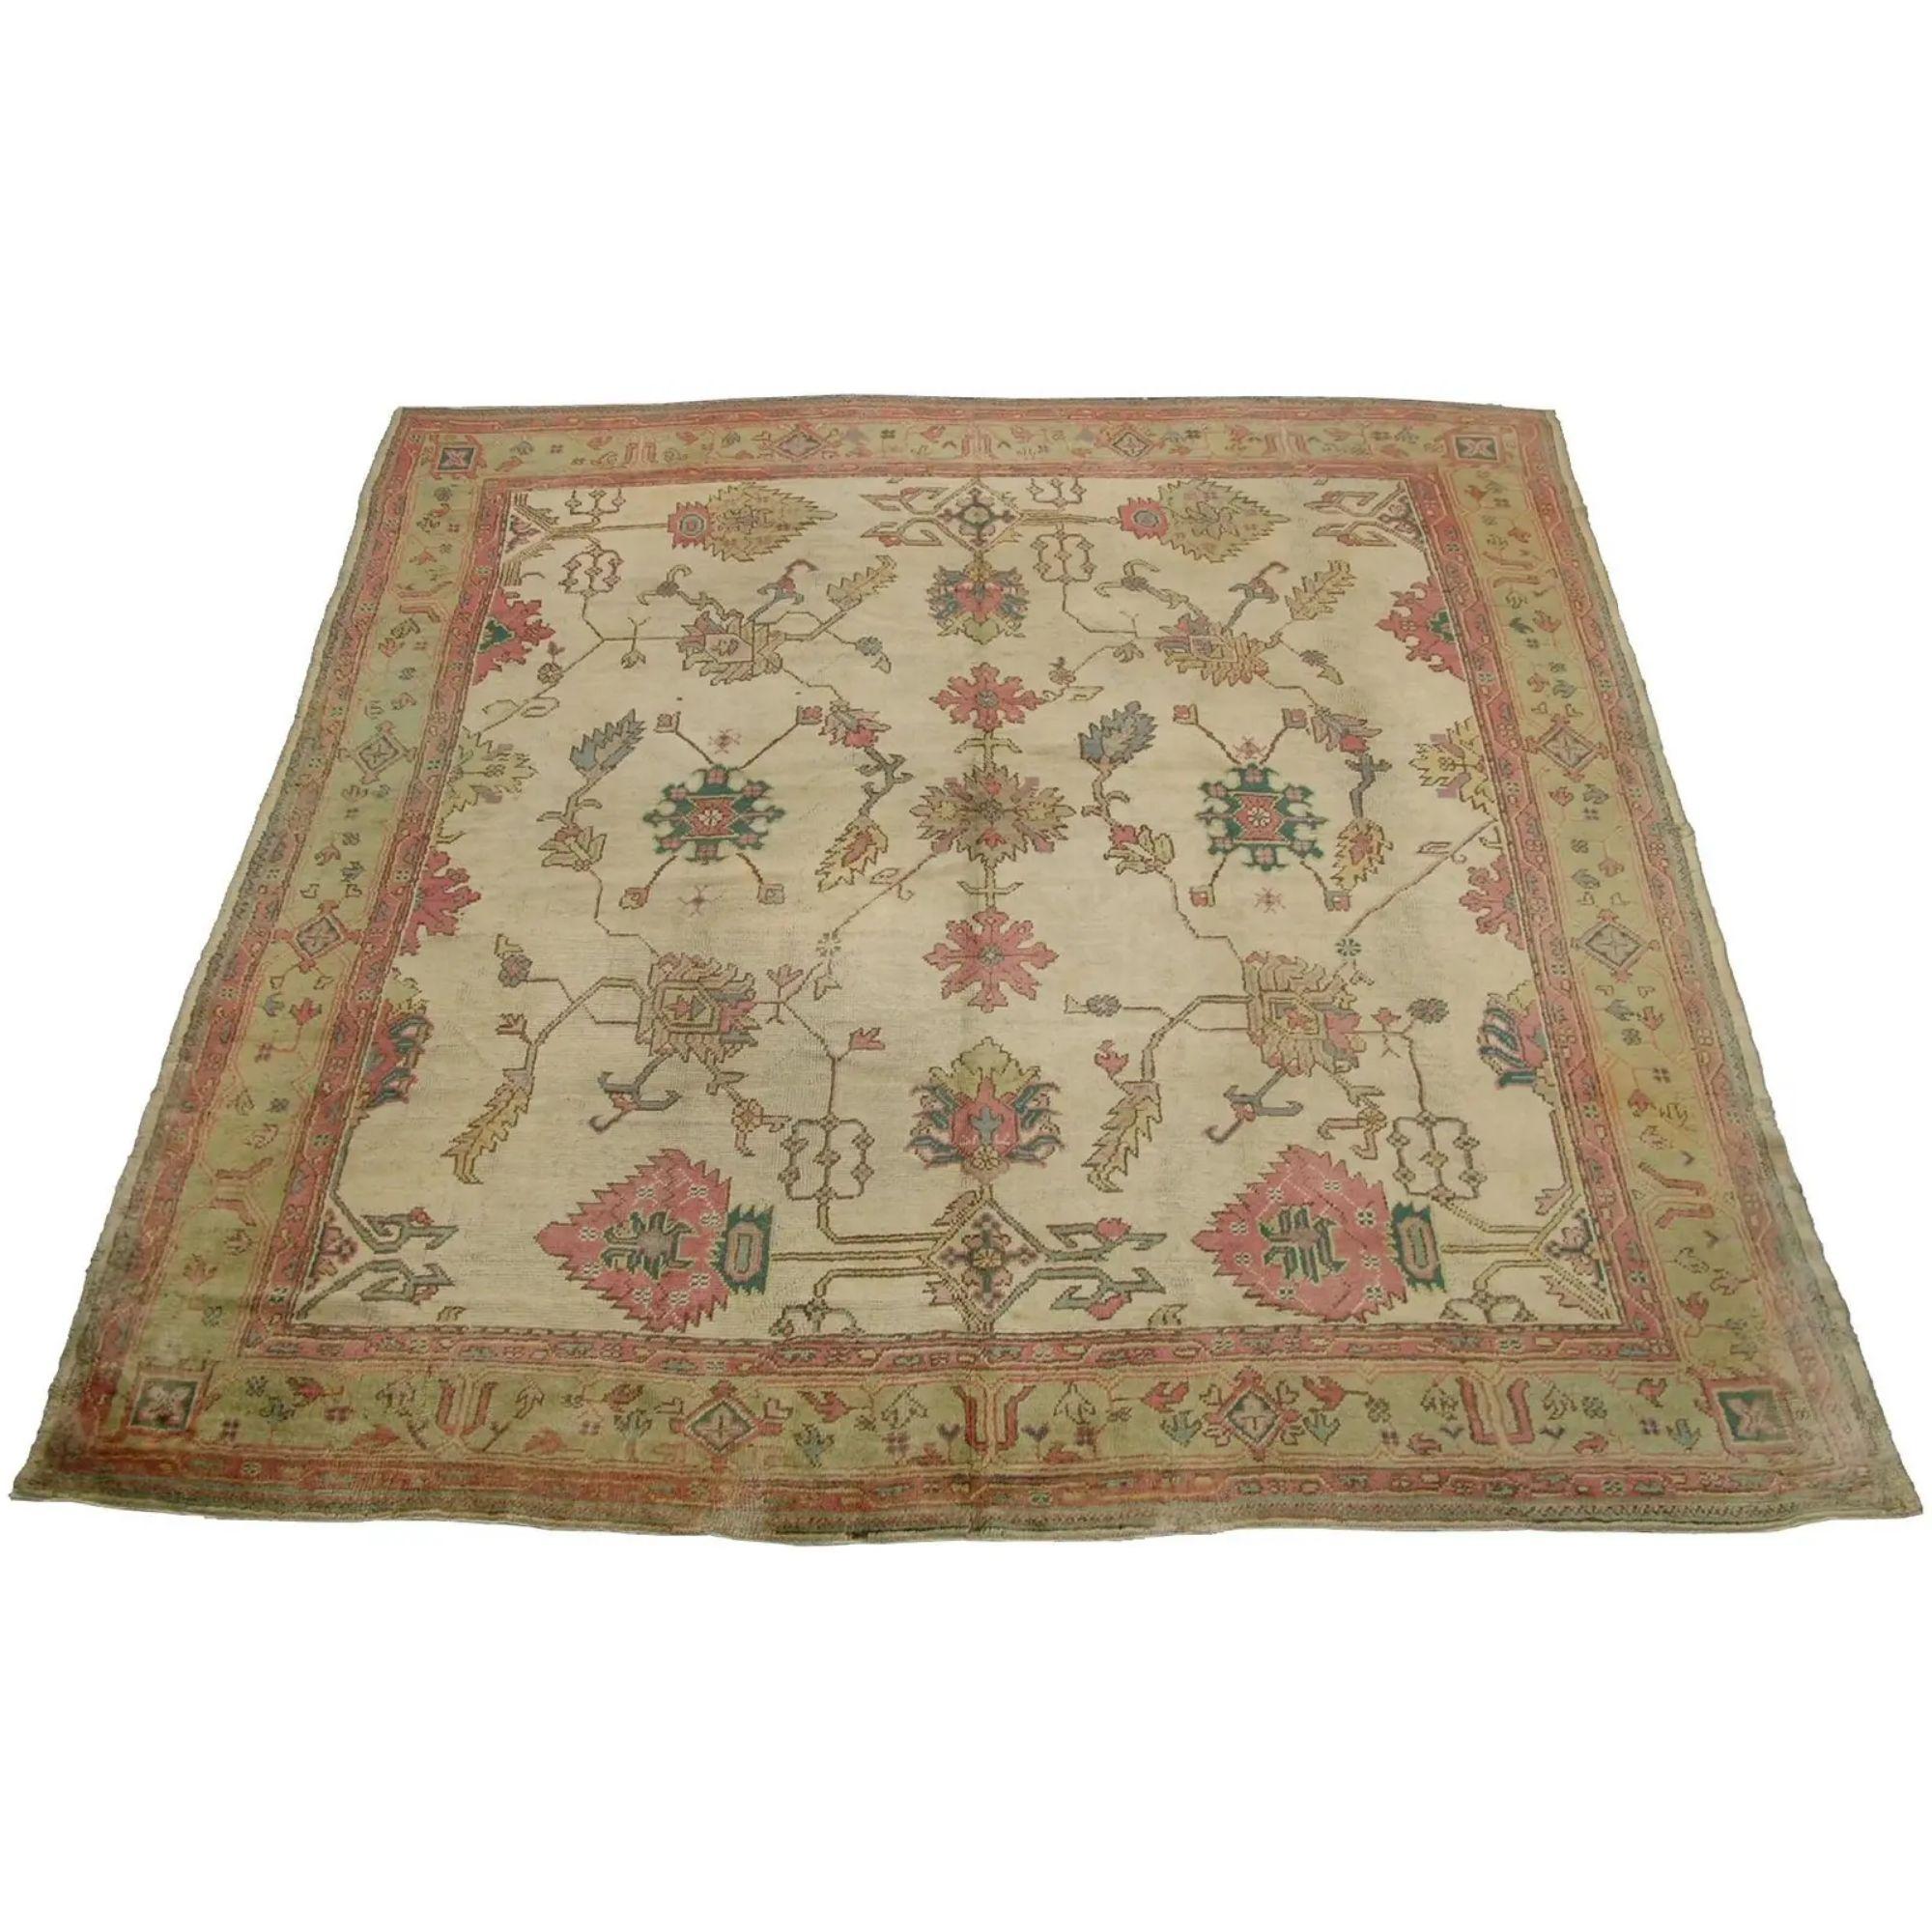 Early 20th Century Antique Turkish Oushak Floral Design Rug 11'6''x10'8' For Sale